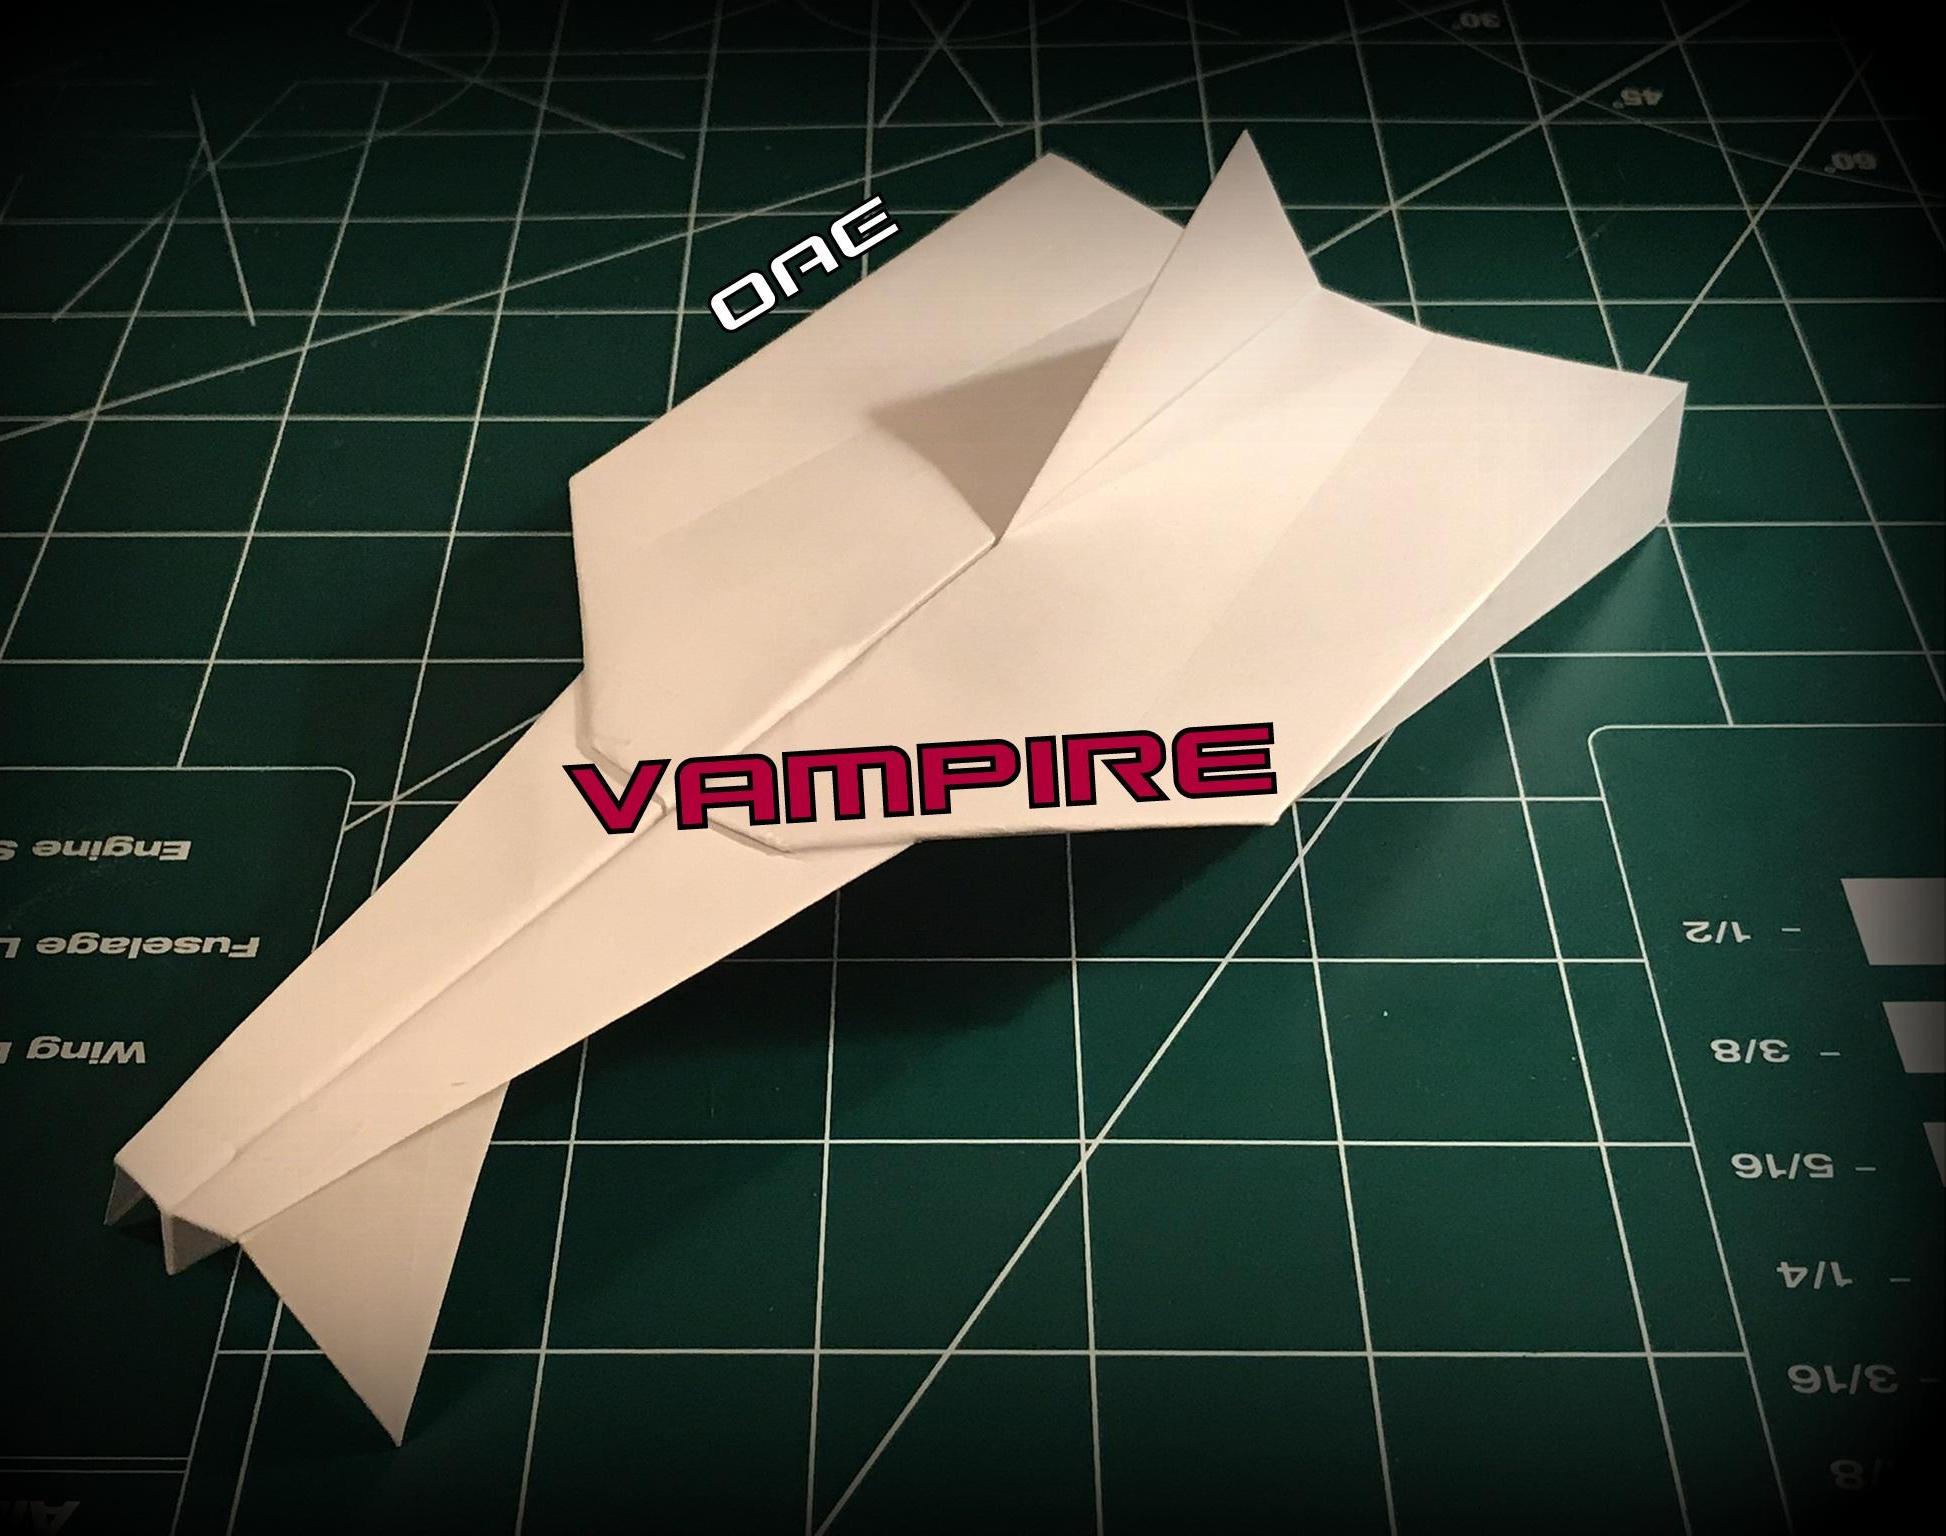 How to Make the Vampire Paper Airplane